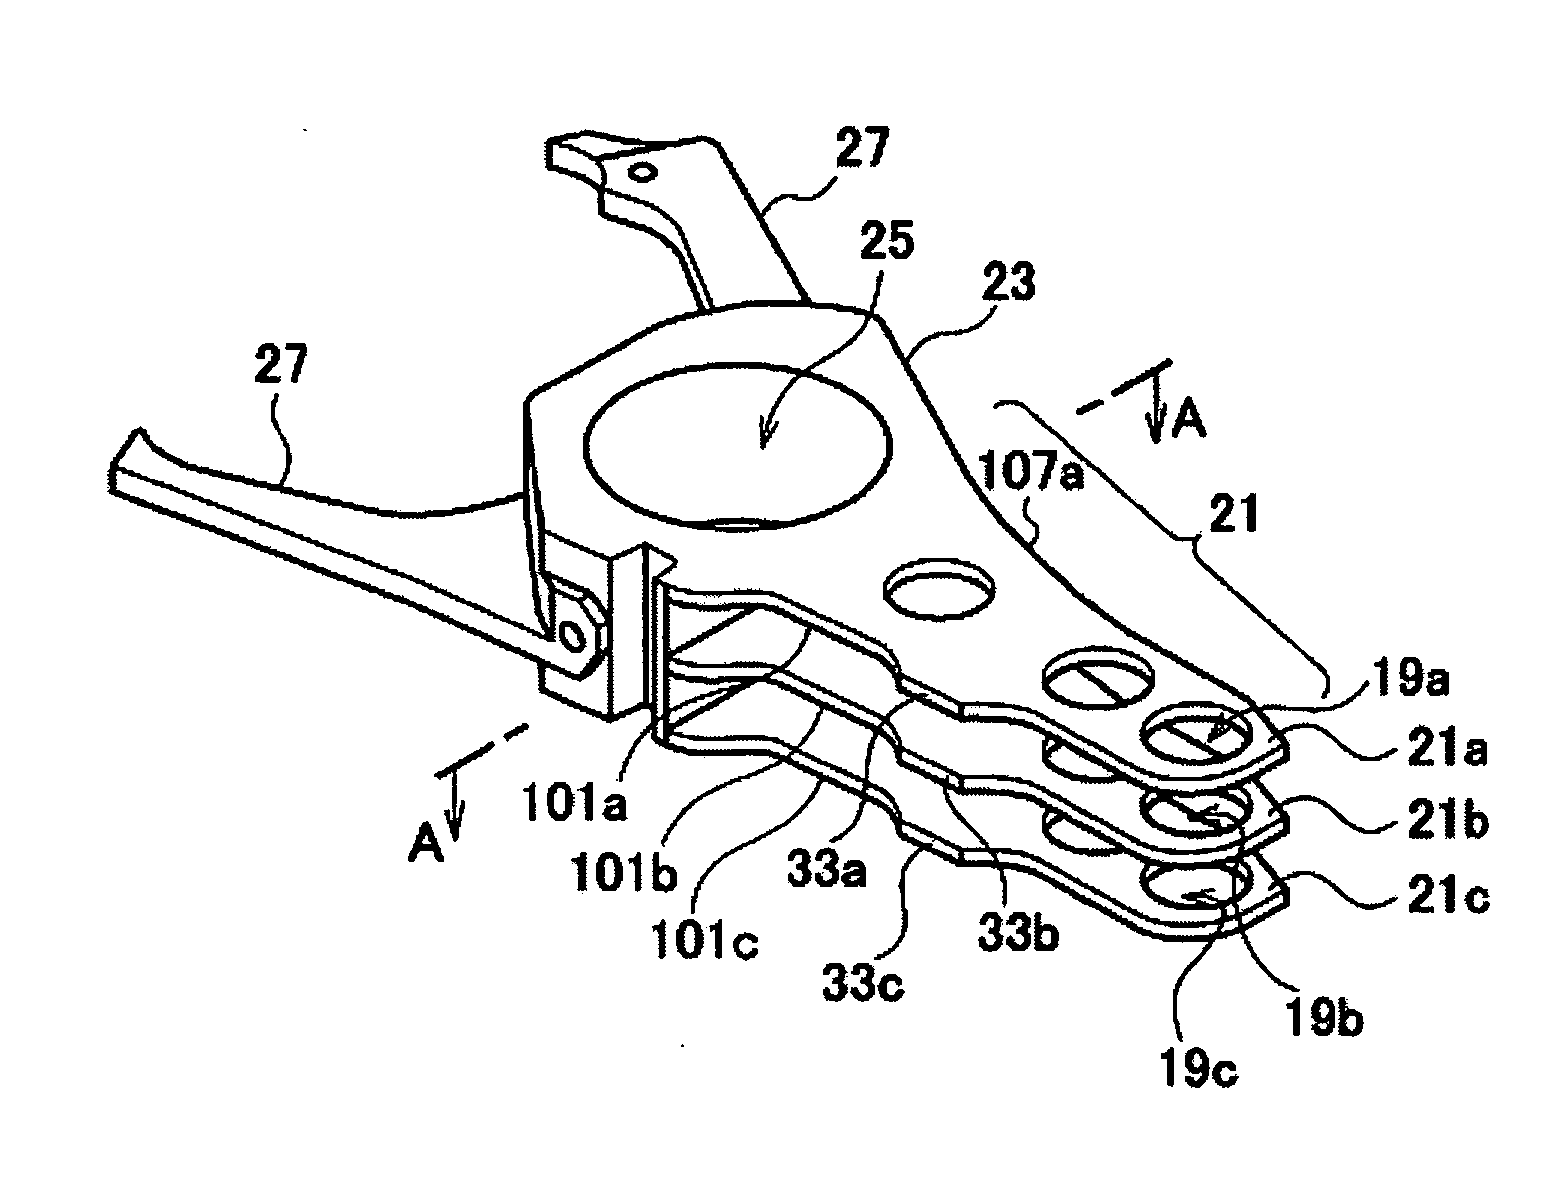 Arm chamfer for comb type actuator in rotating disk storage device and carriage assembly